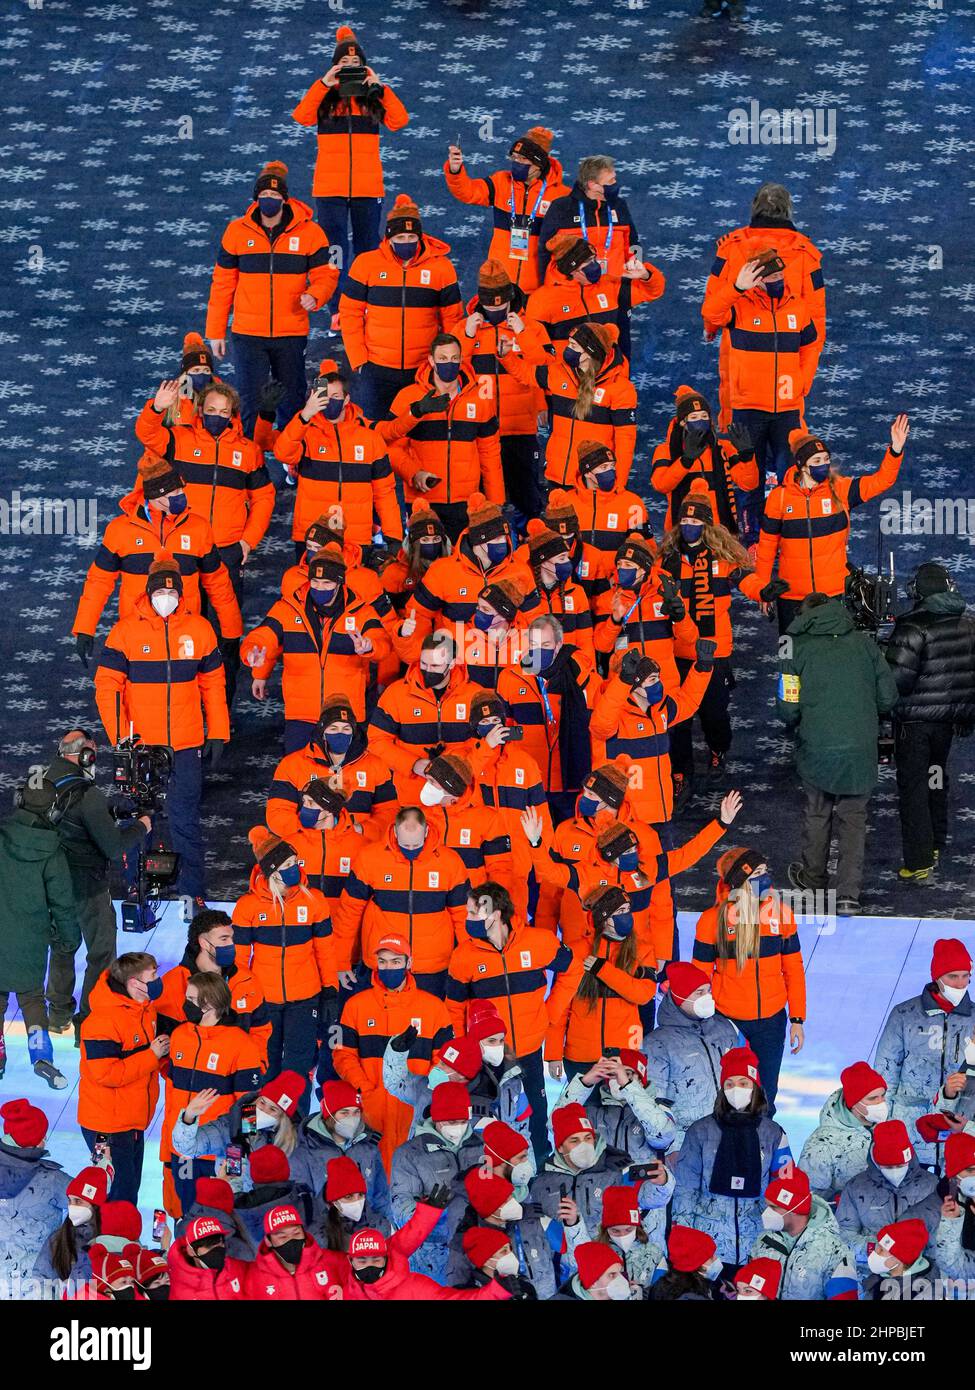 BEIJING, CHINA - FEBRUARY 20: Team of the Netherlands during Closing Ceremony during the Beijing 2022 Olympic Games at the National Stadium on February 20, 2022 in Beijing, China (Photo by Douwe Bijlsma/Orange Pictures) NOCNSF Stock Photo